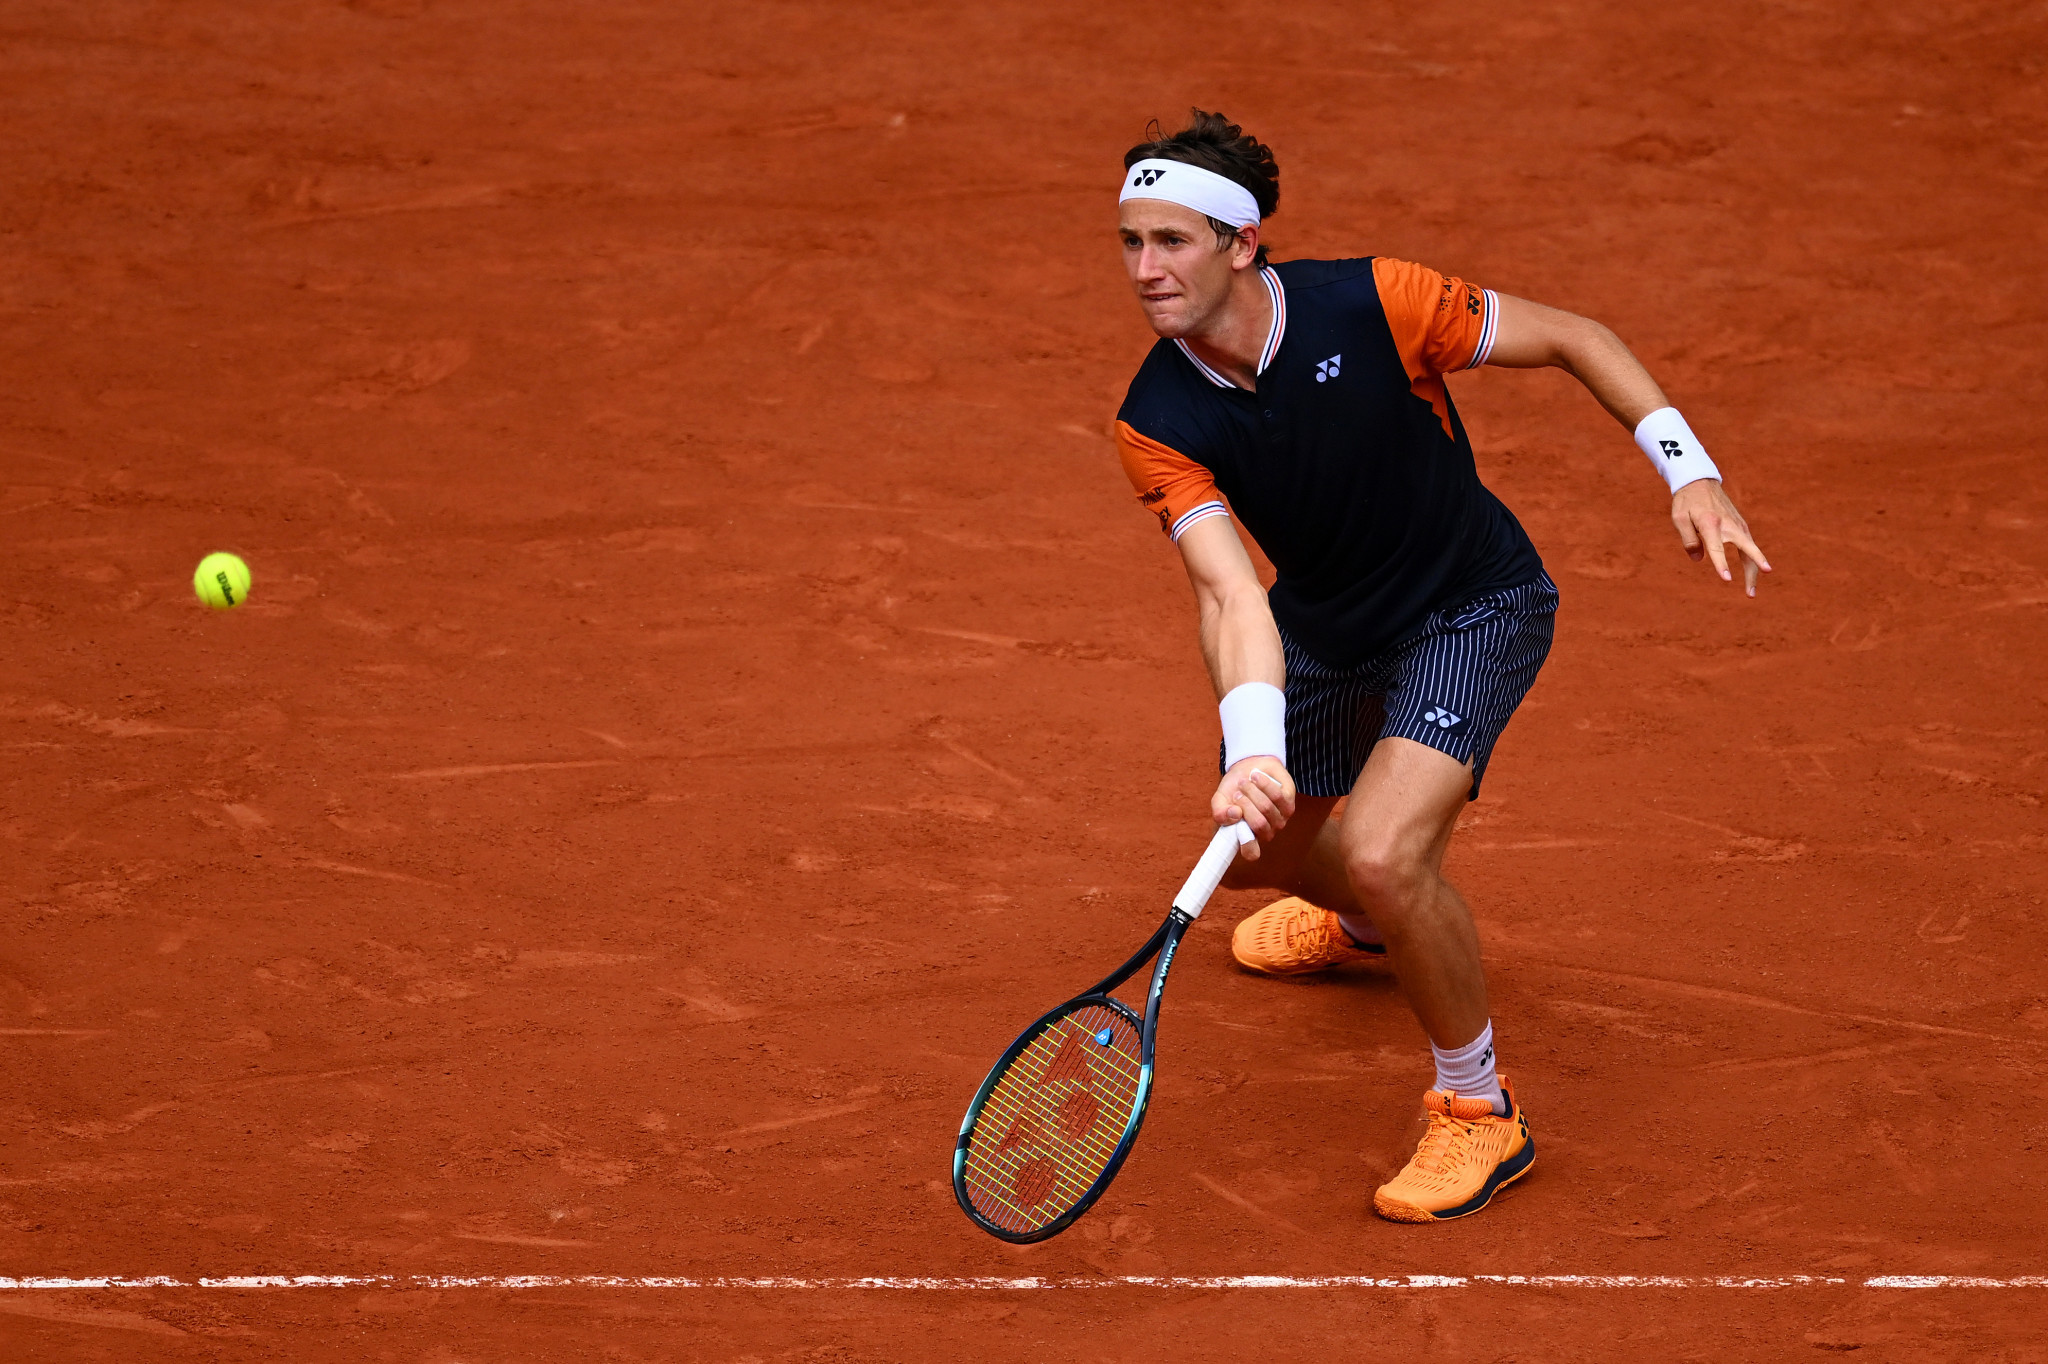 Casper Ruud finished runner-up in the French Open men's singles tournament for the second year in a row ©Getty Images